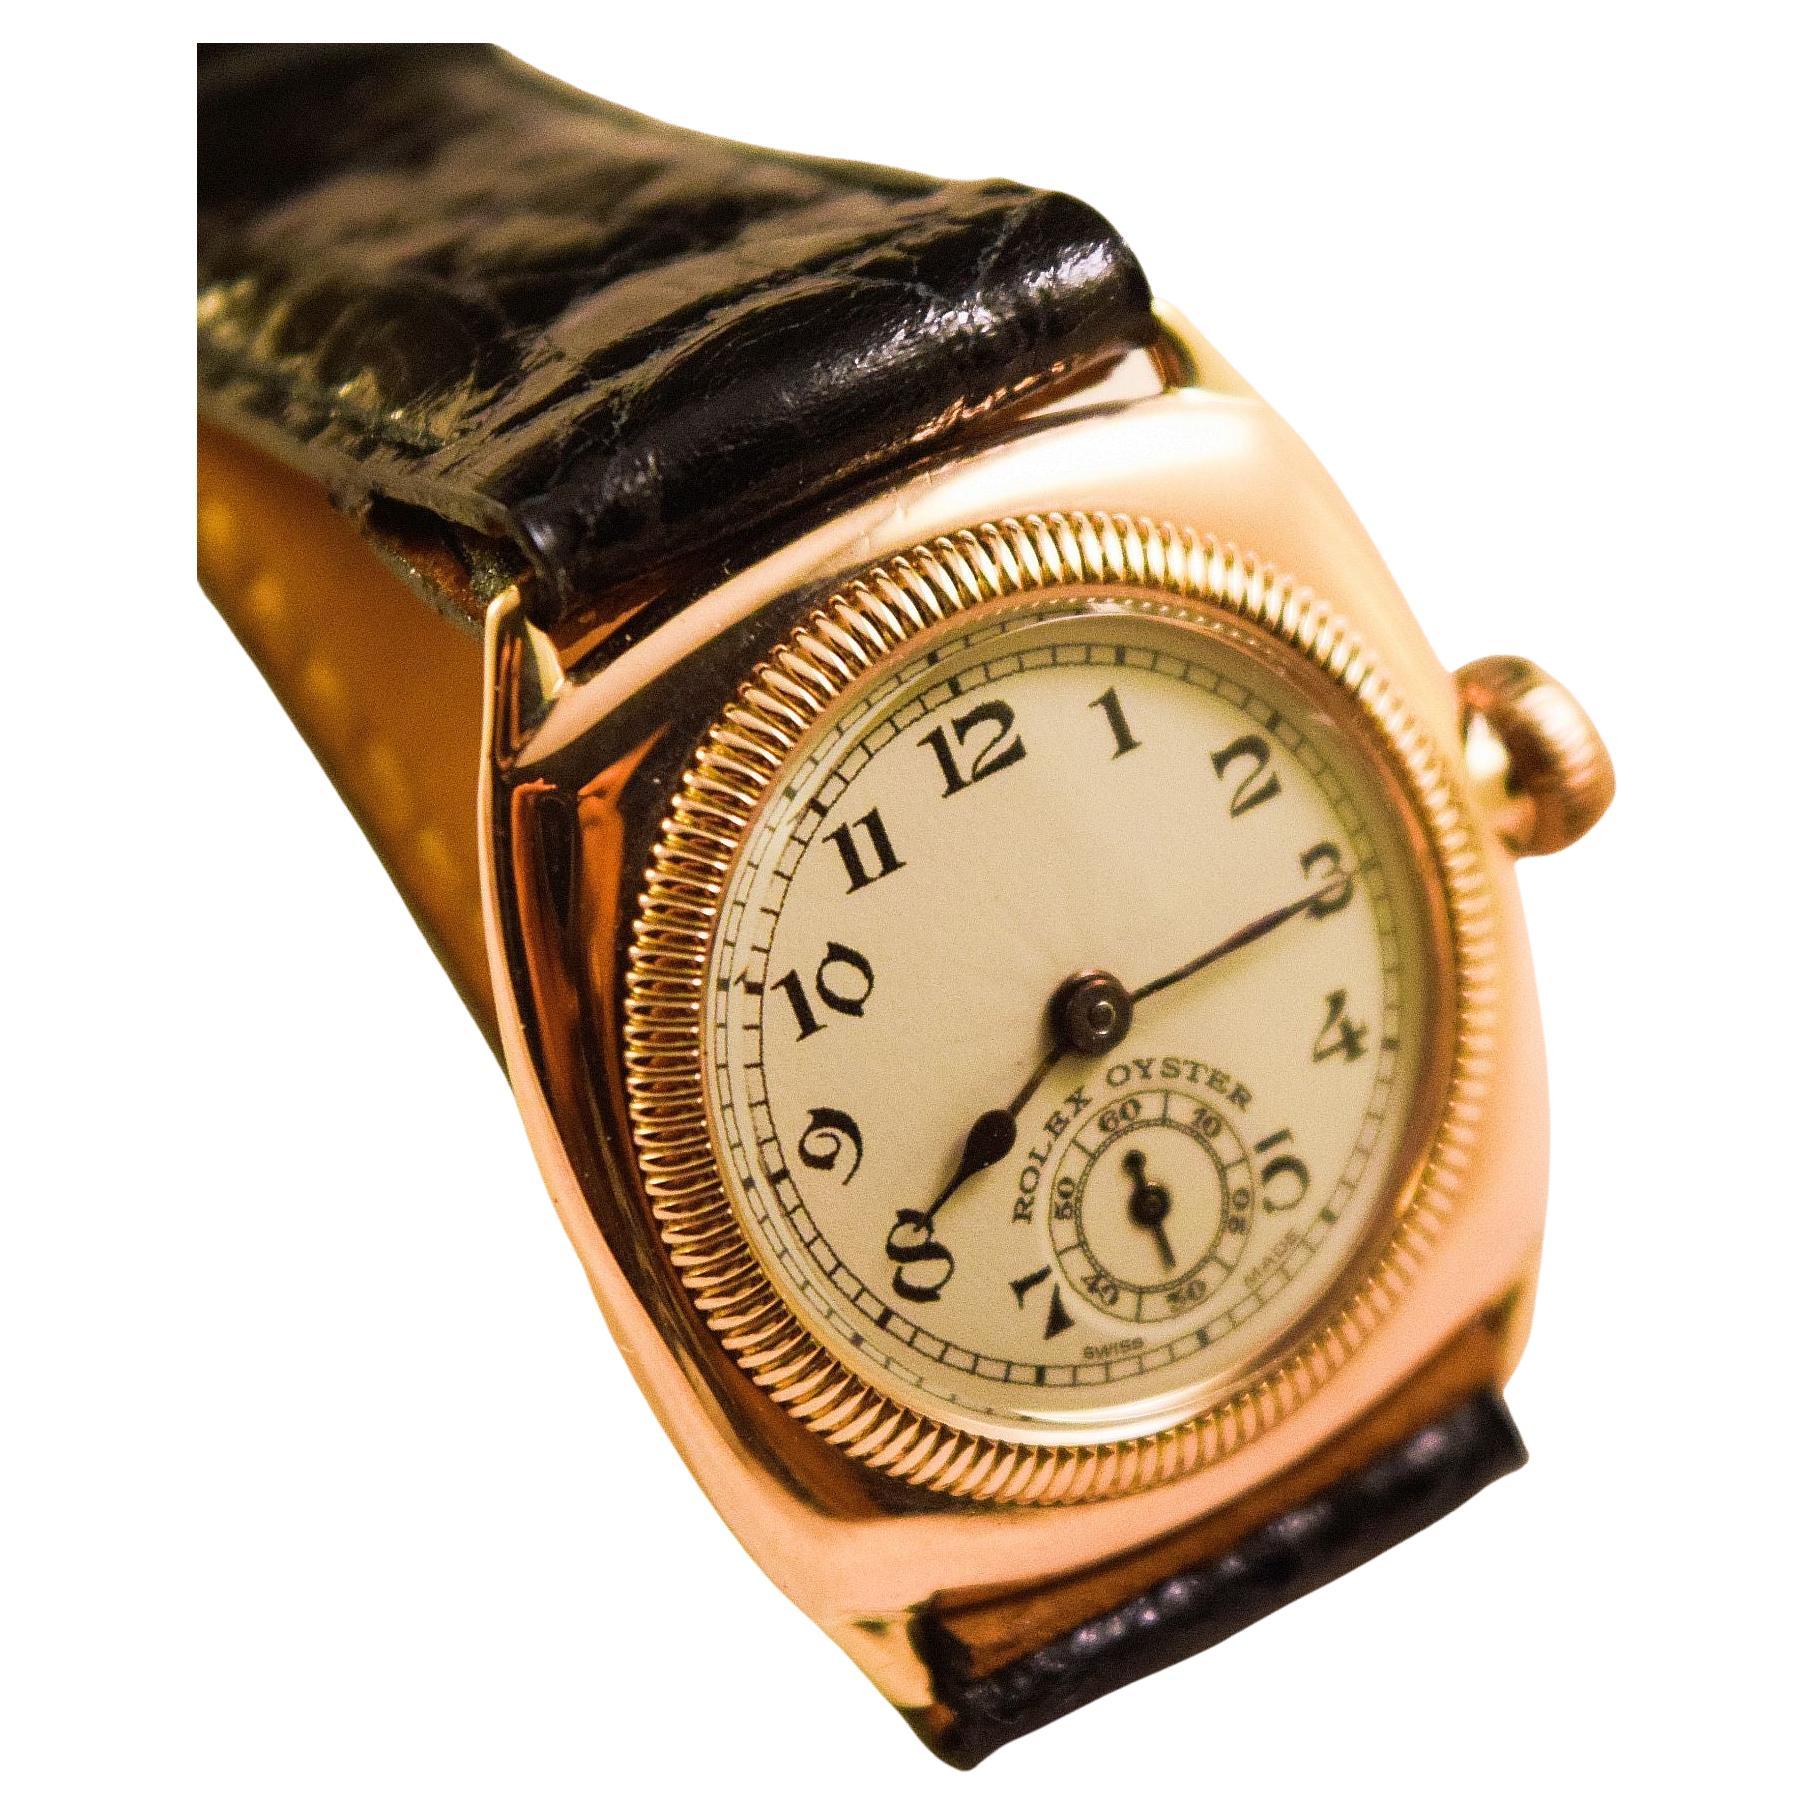 Rolex Oyster solid deep pink gold early cushion shaped case
This watch is from late 20's early 30's
The first Oyster case produced by Rolex and it is
the first water proof watch in the world.
Amazing Pink gold case with screw down bezel and